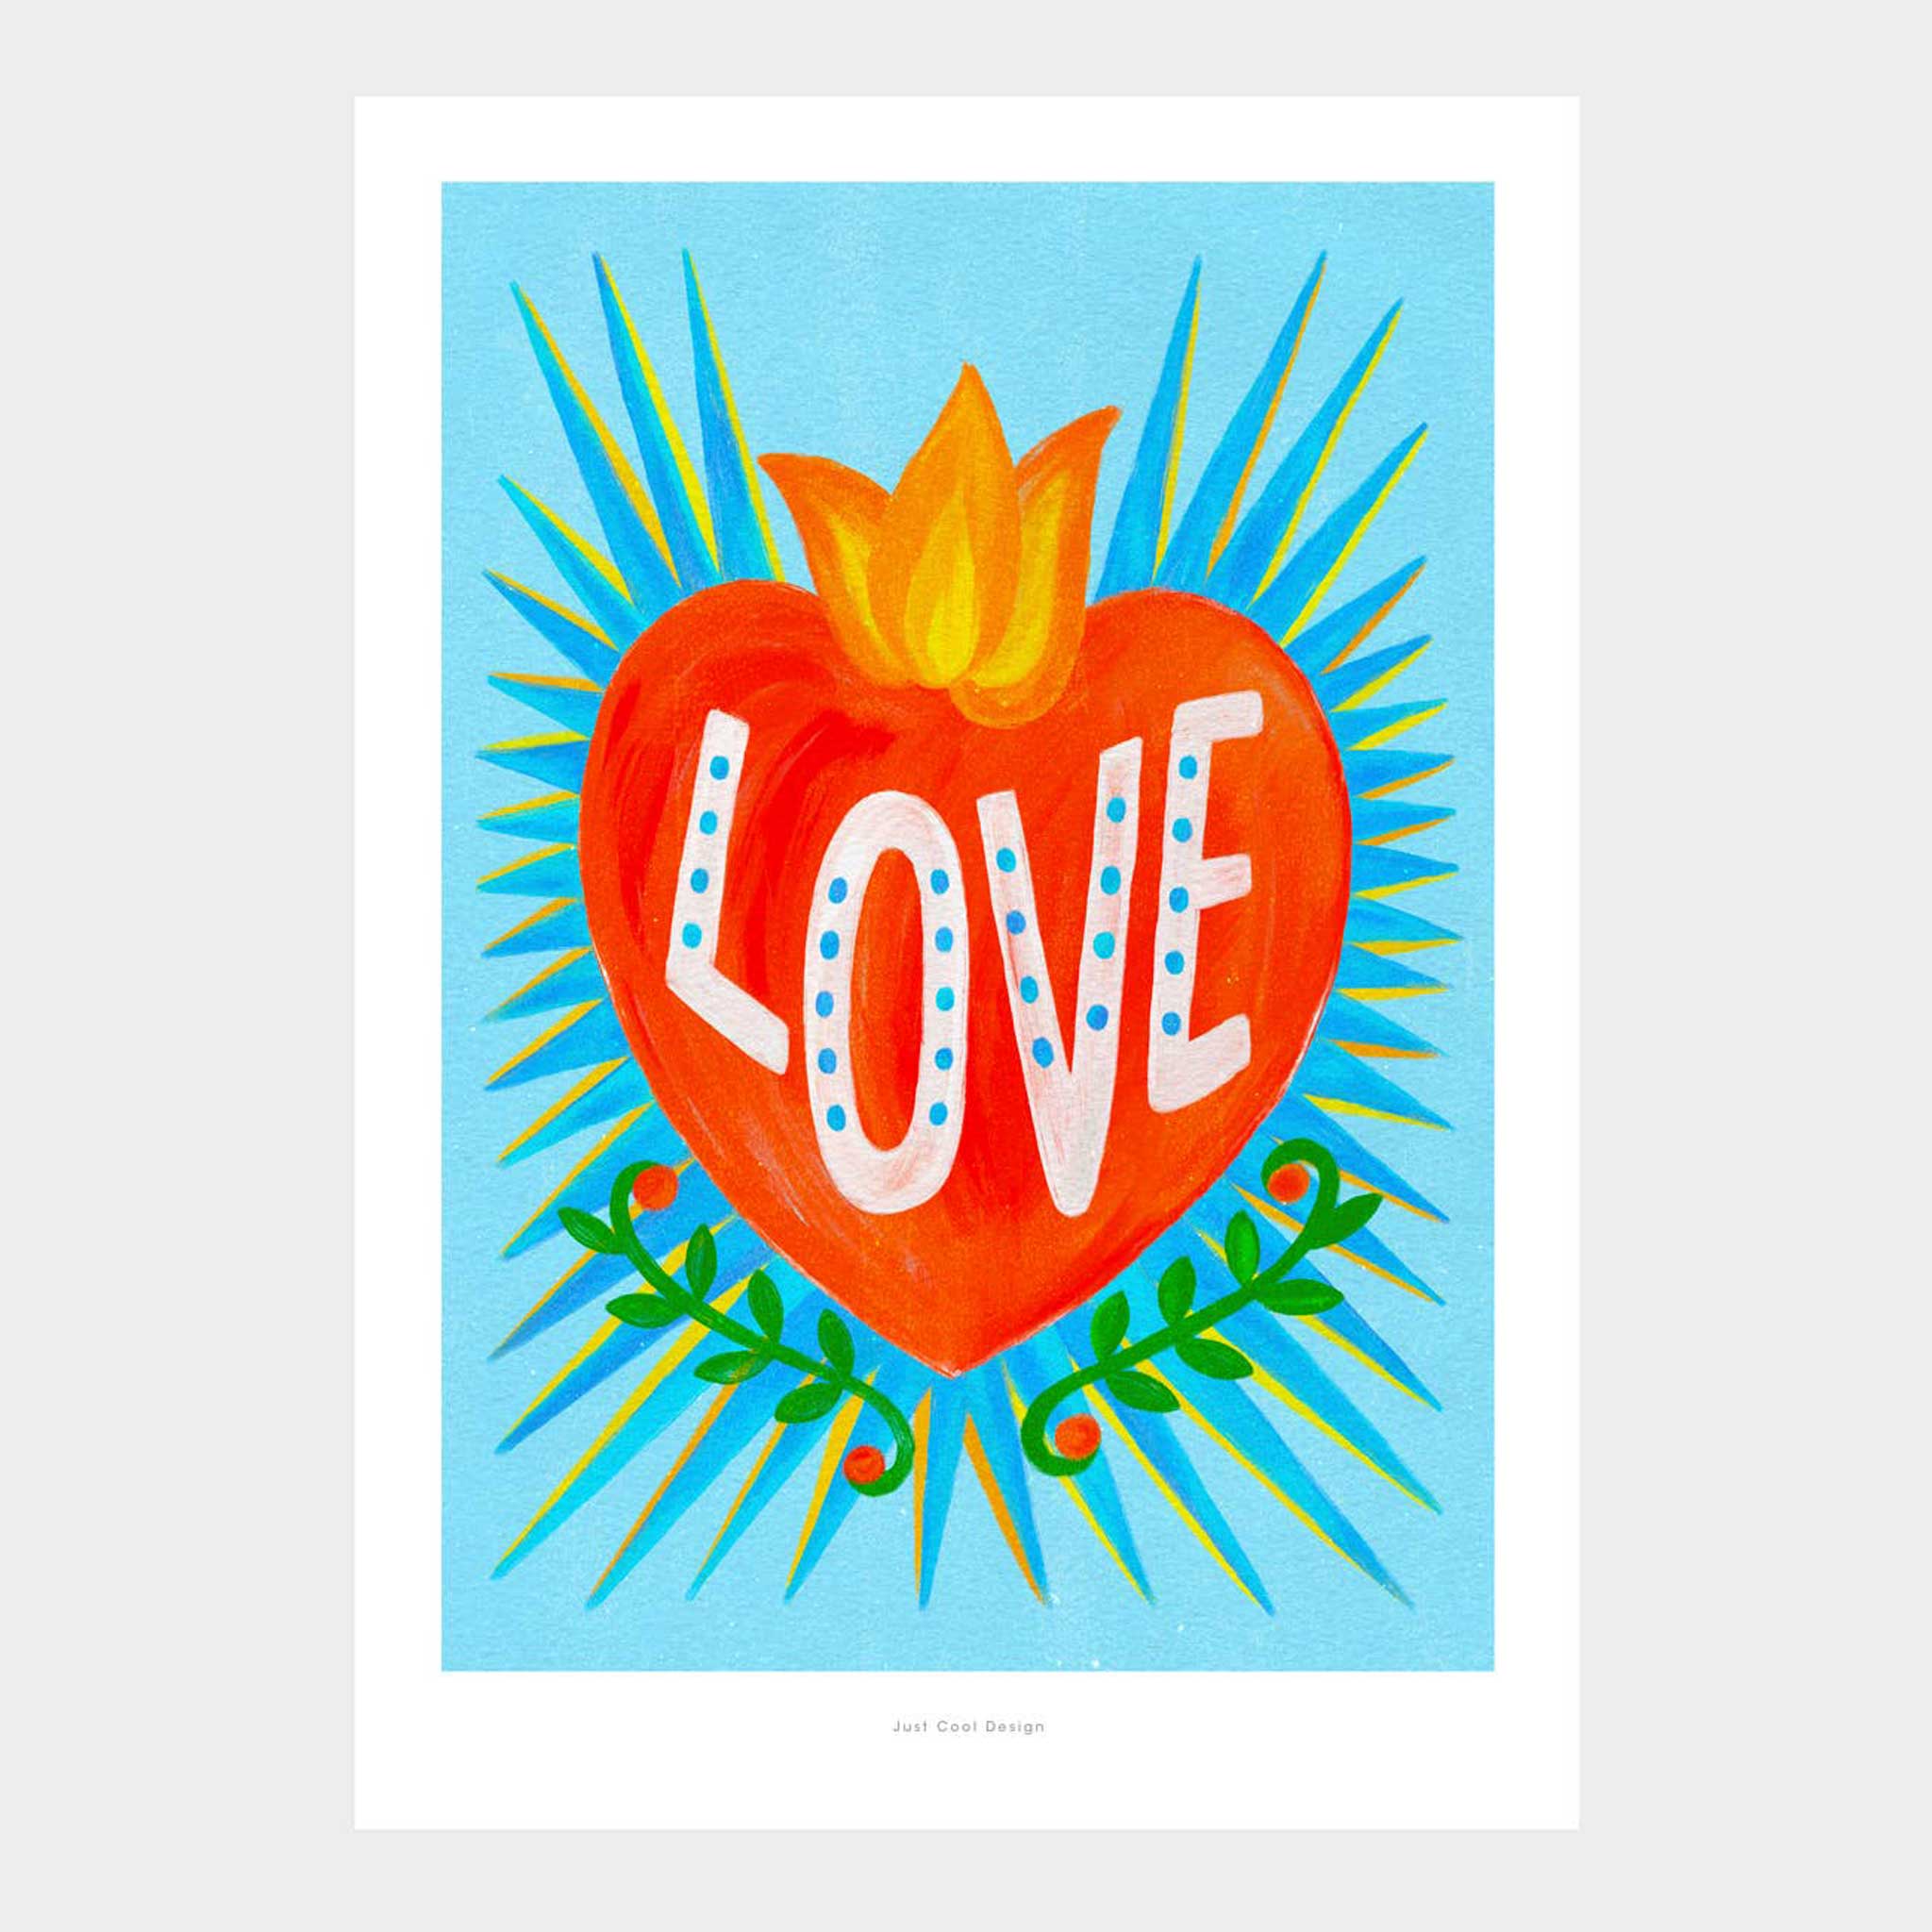 MEXICAN LOVE HEART | Grafik POSTER | A4 Format | Just Another Cool Design